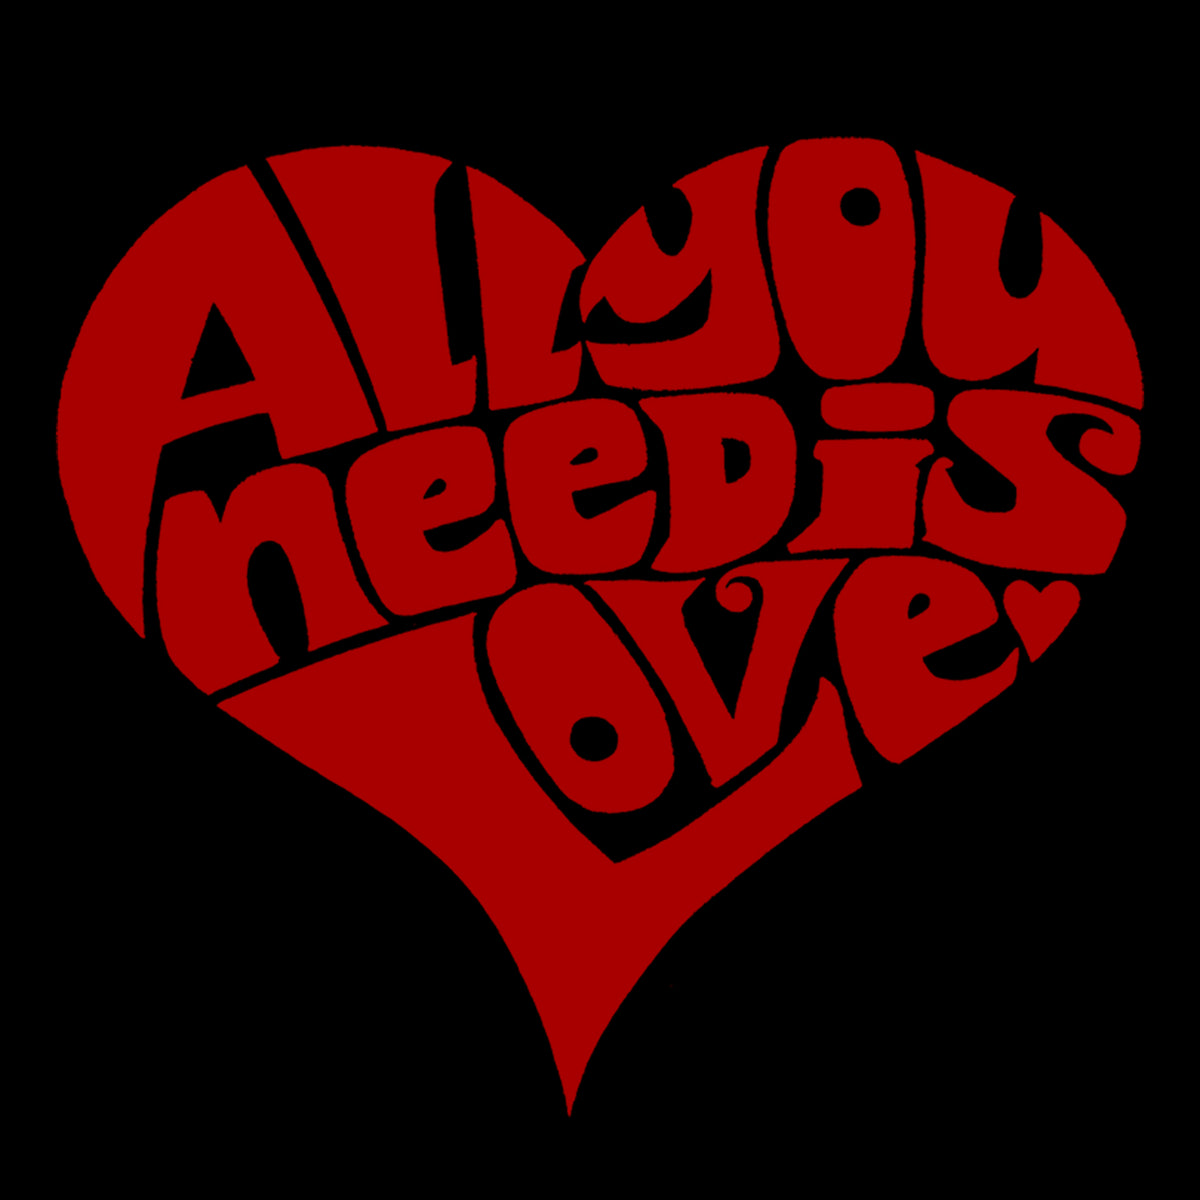 Love Is All You Need - Cinéart